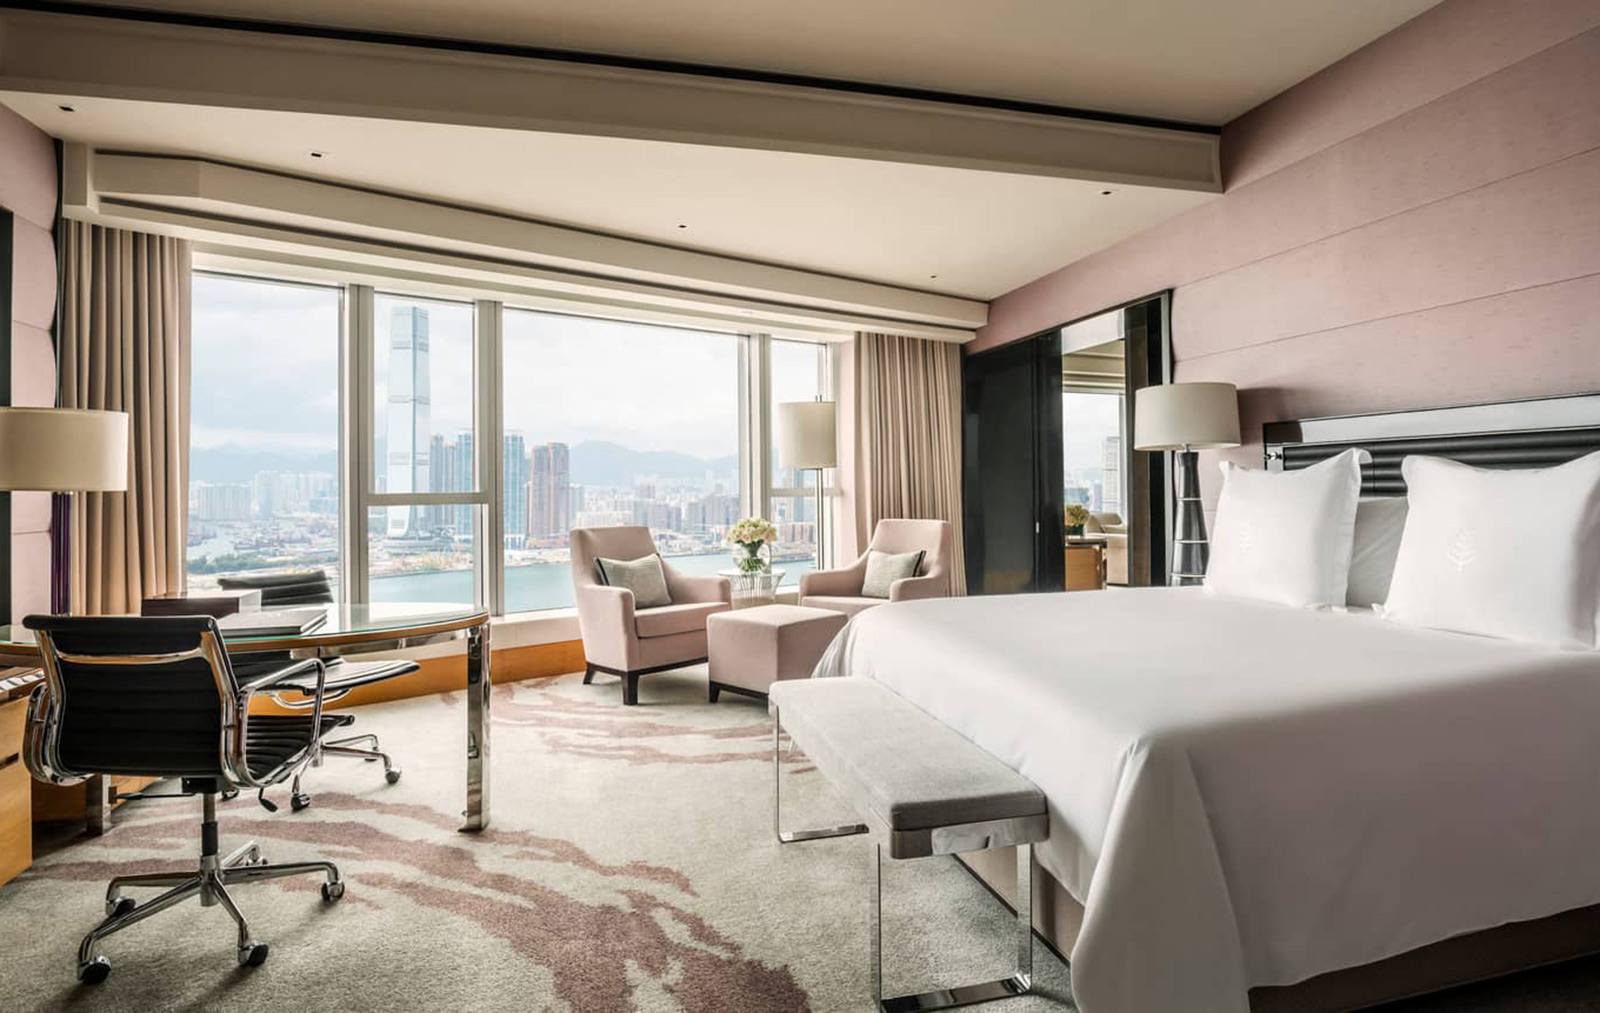 Room interior with city skyline view at the Four Seasons Hong Kong